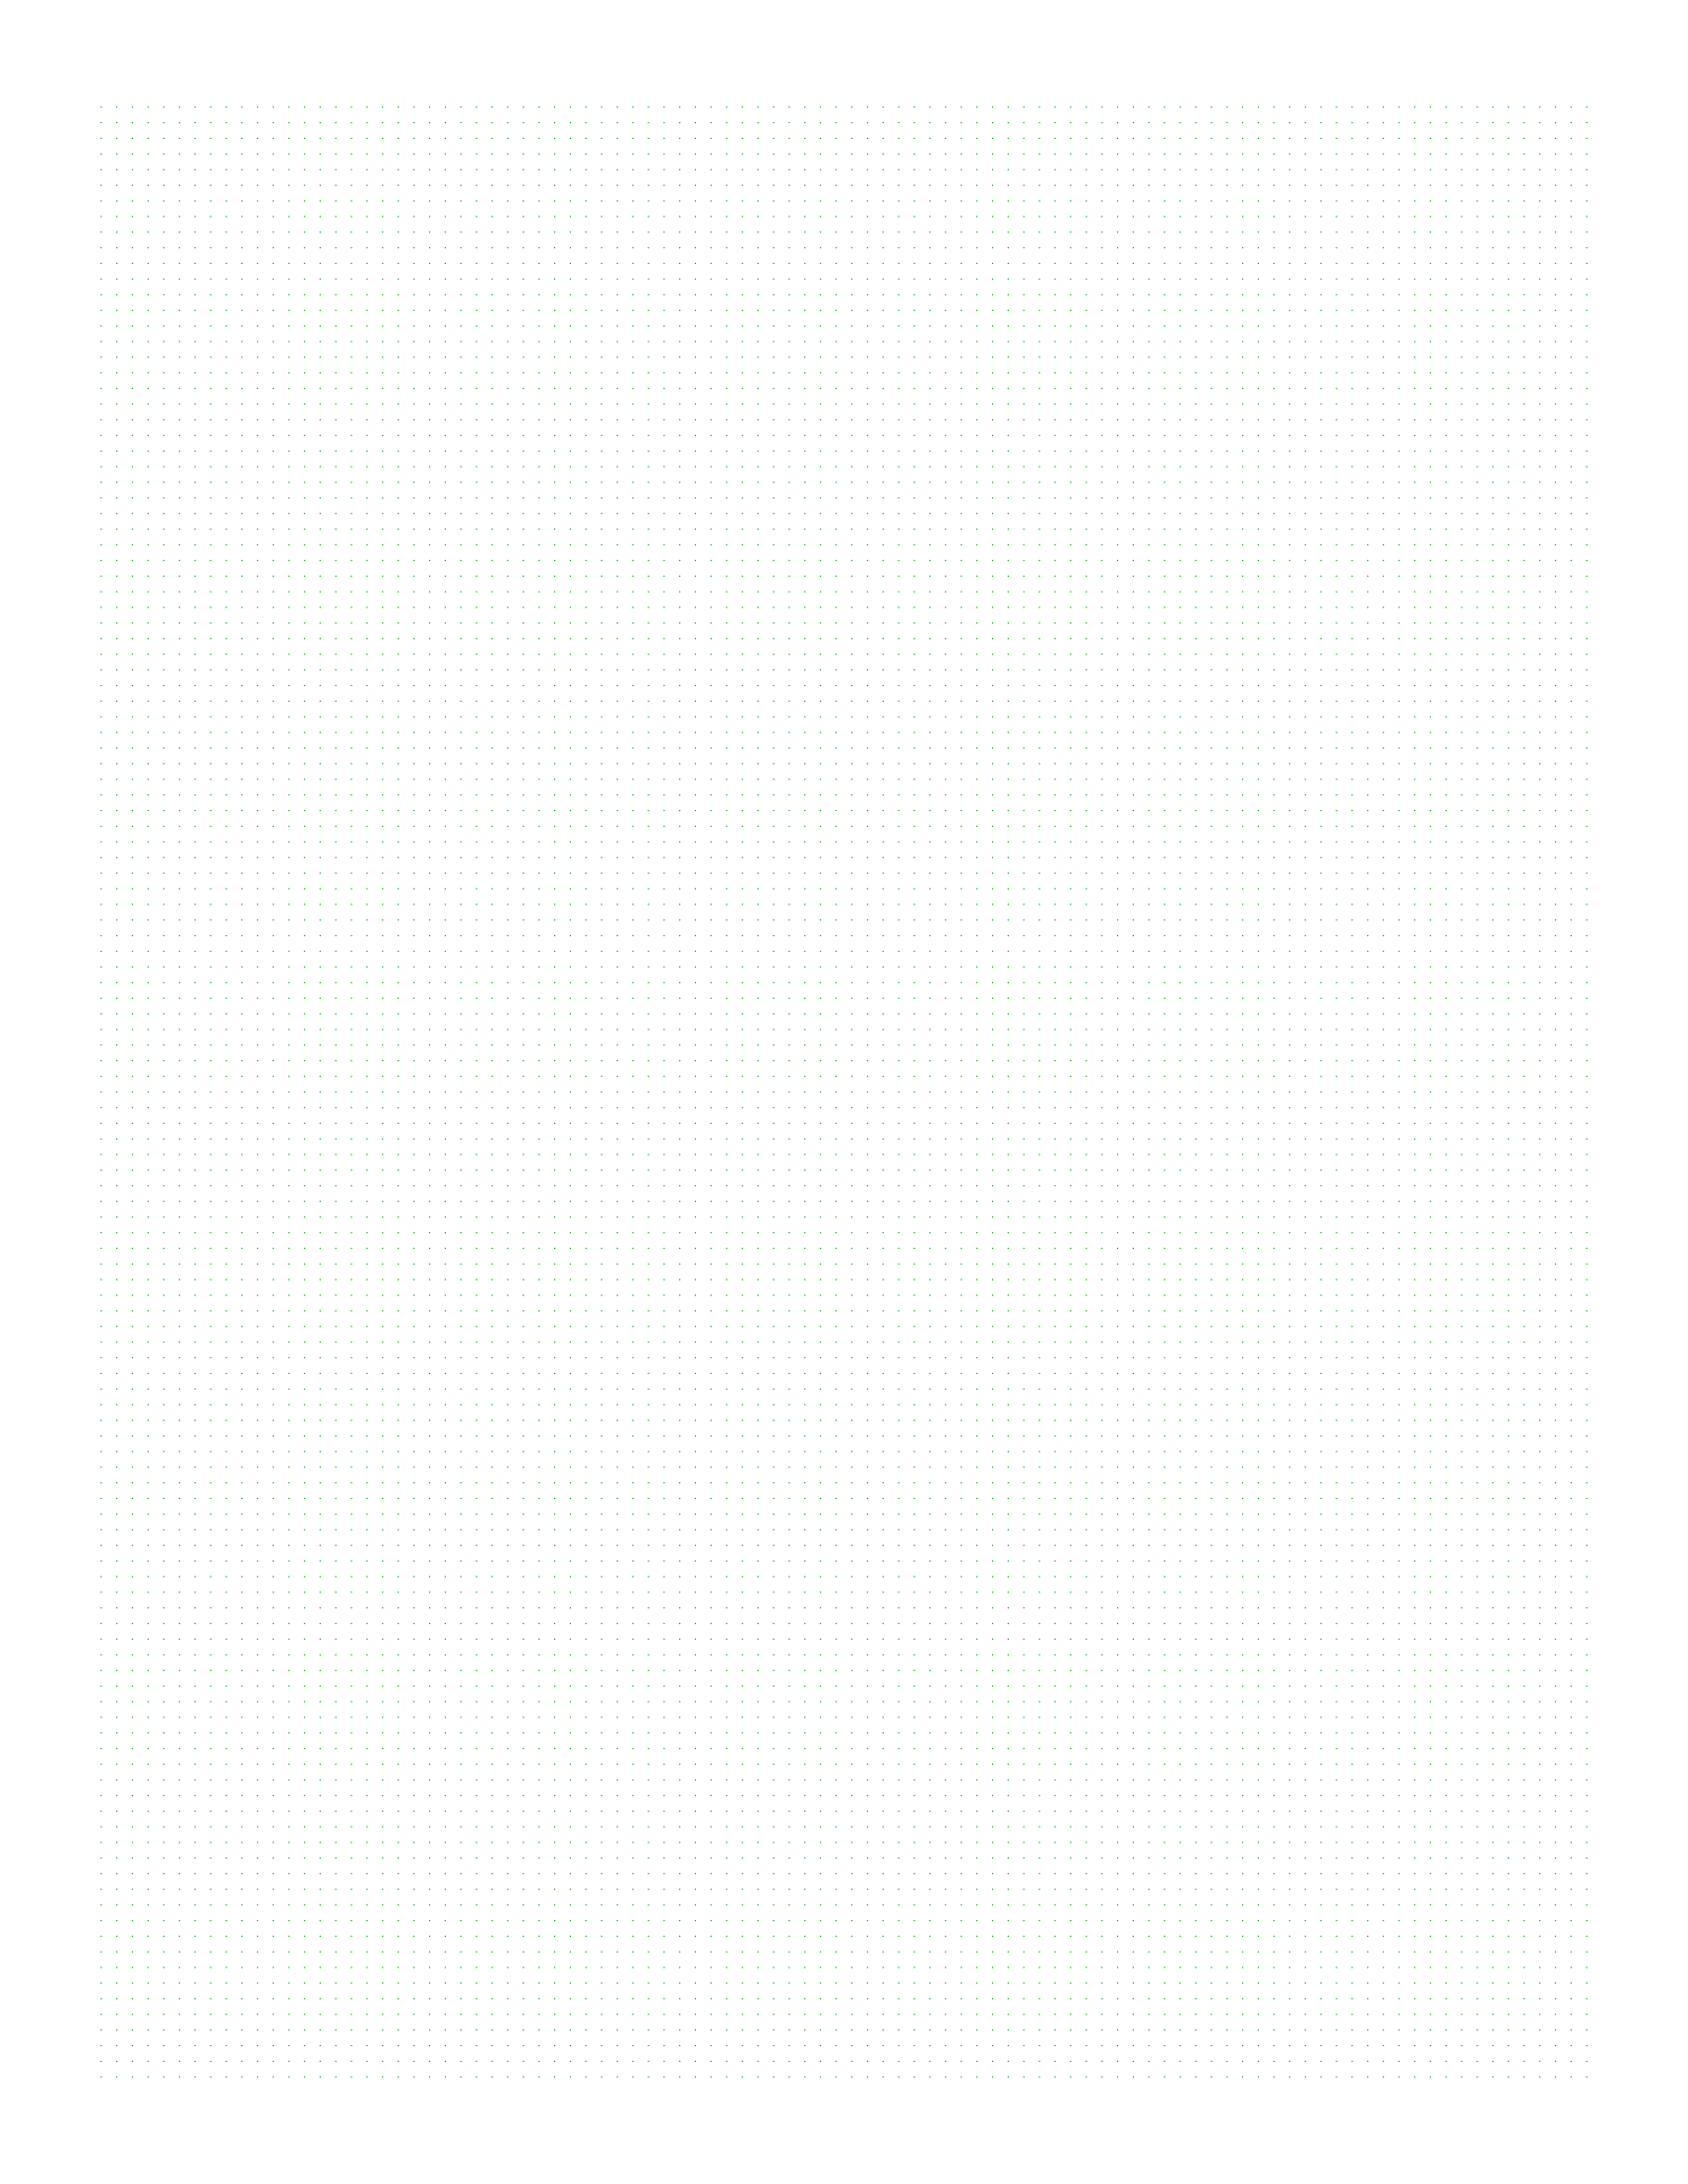 free online graph paper square dots